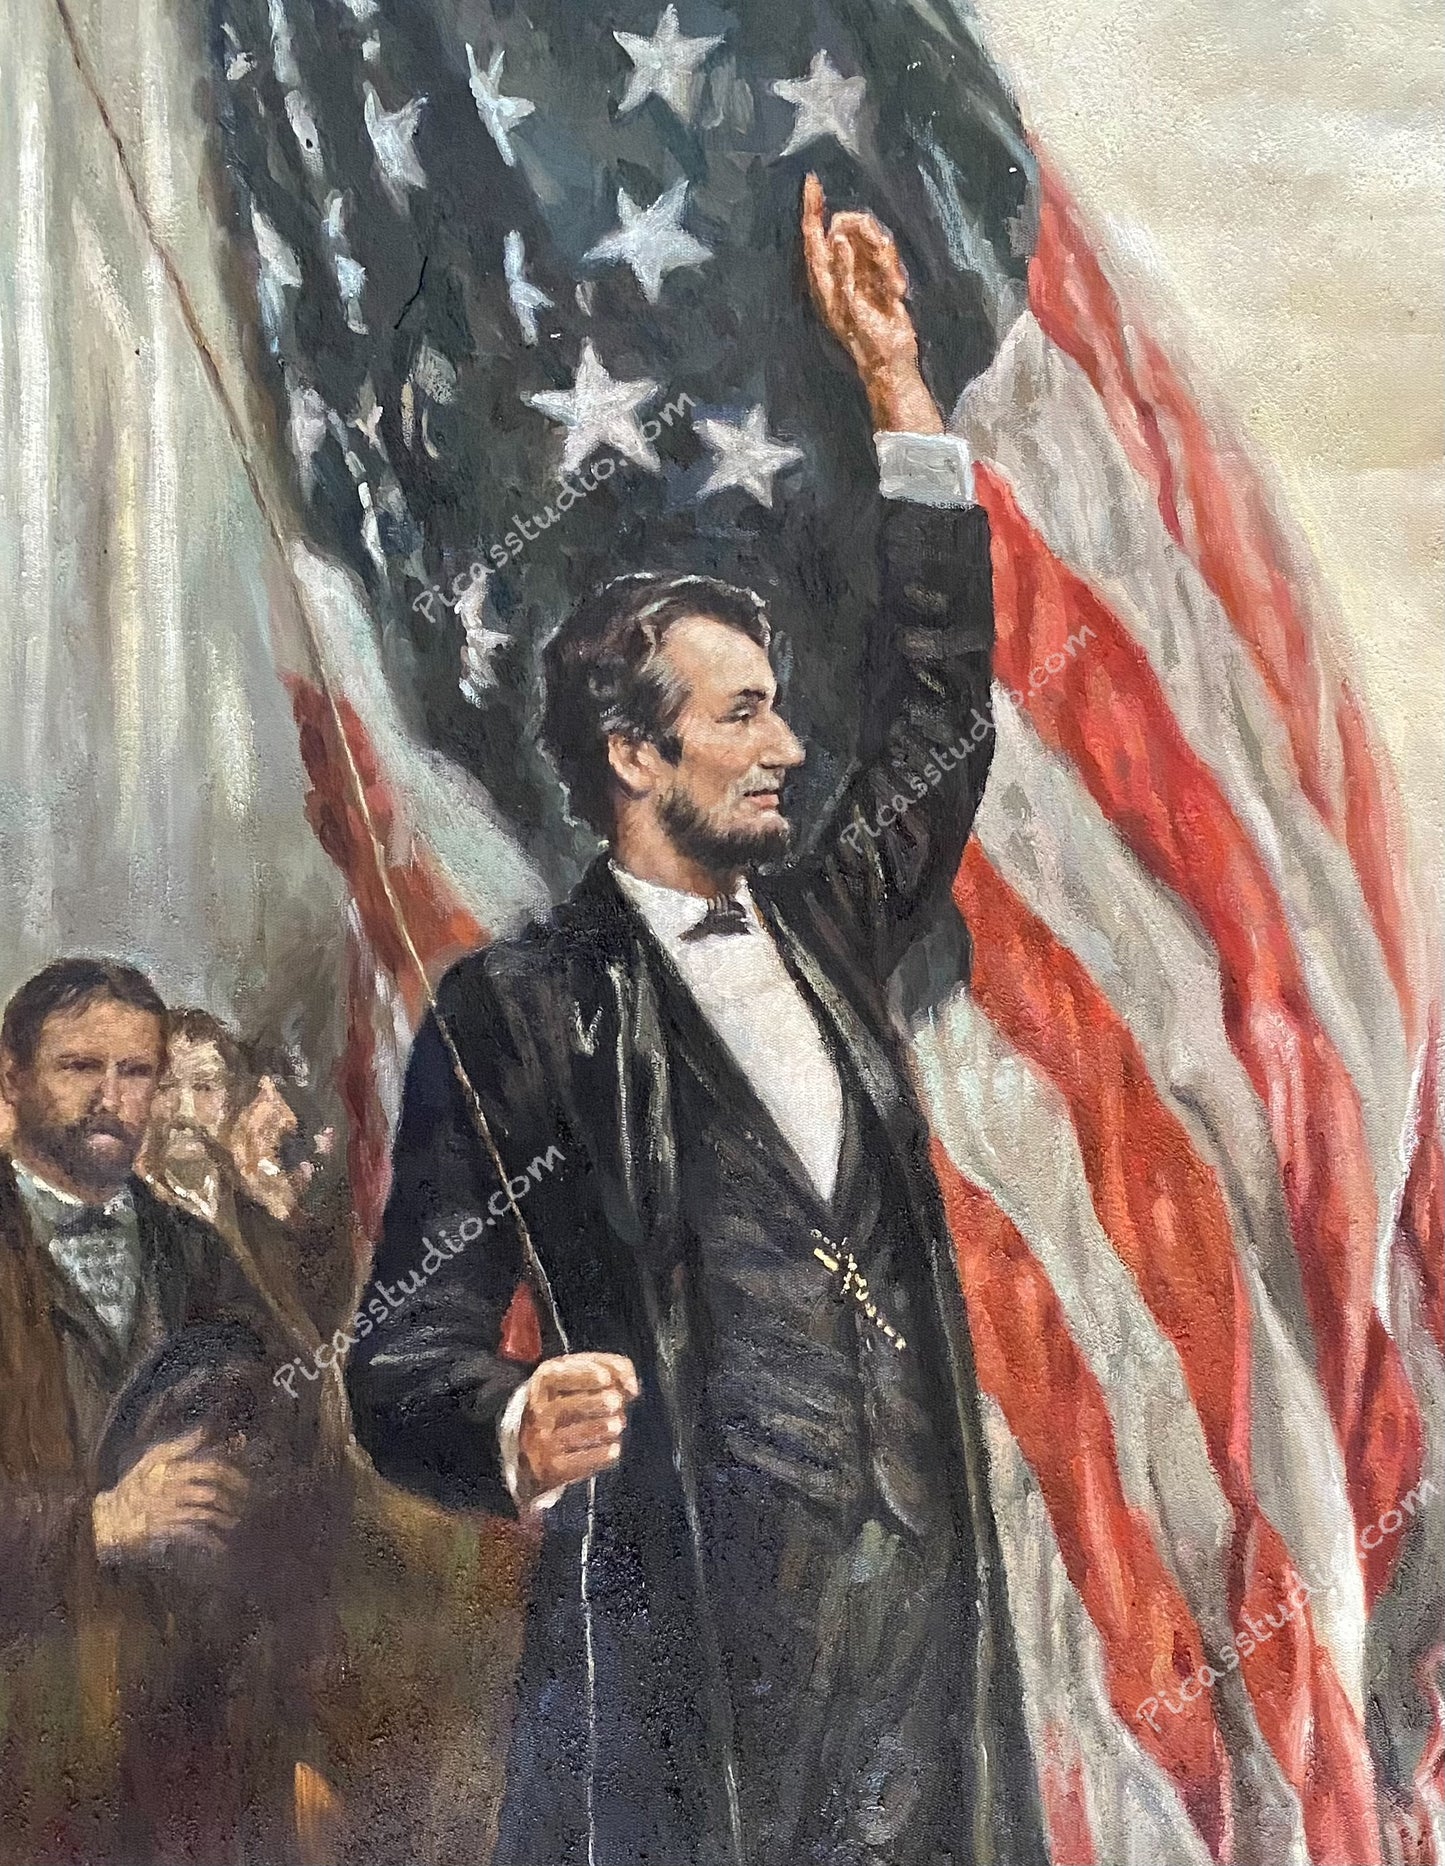 American Civil War Painting featuring President Abraham Lincoln holding the American Flag Vintage Oil Painting Hand Painted Oil on Canvas Wall Art Decor Unframed